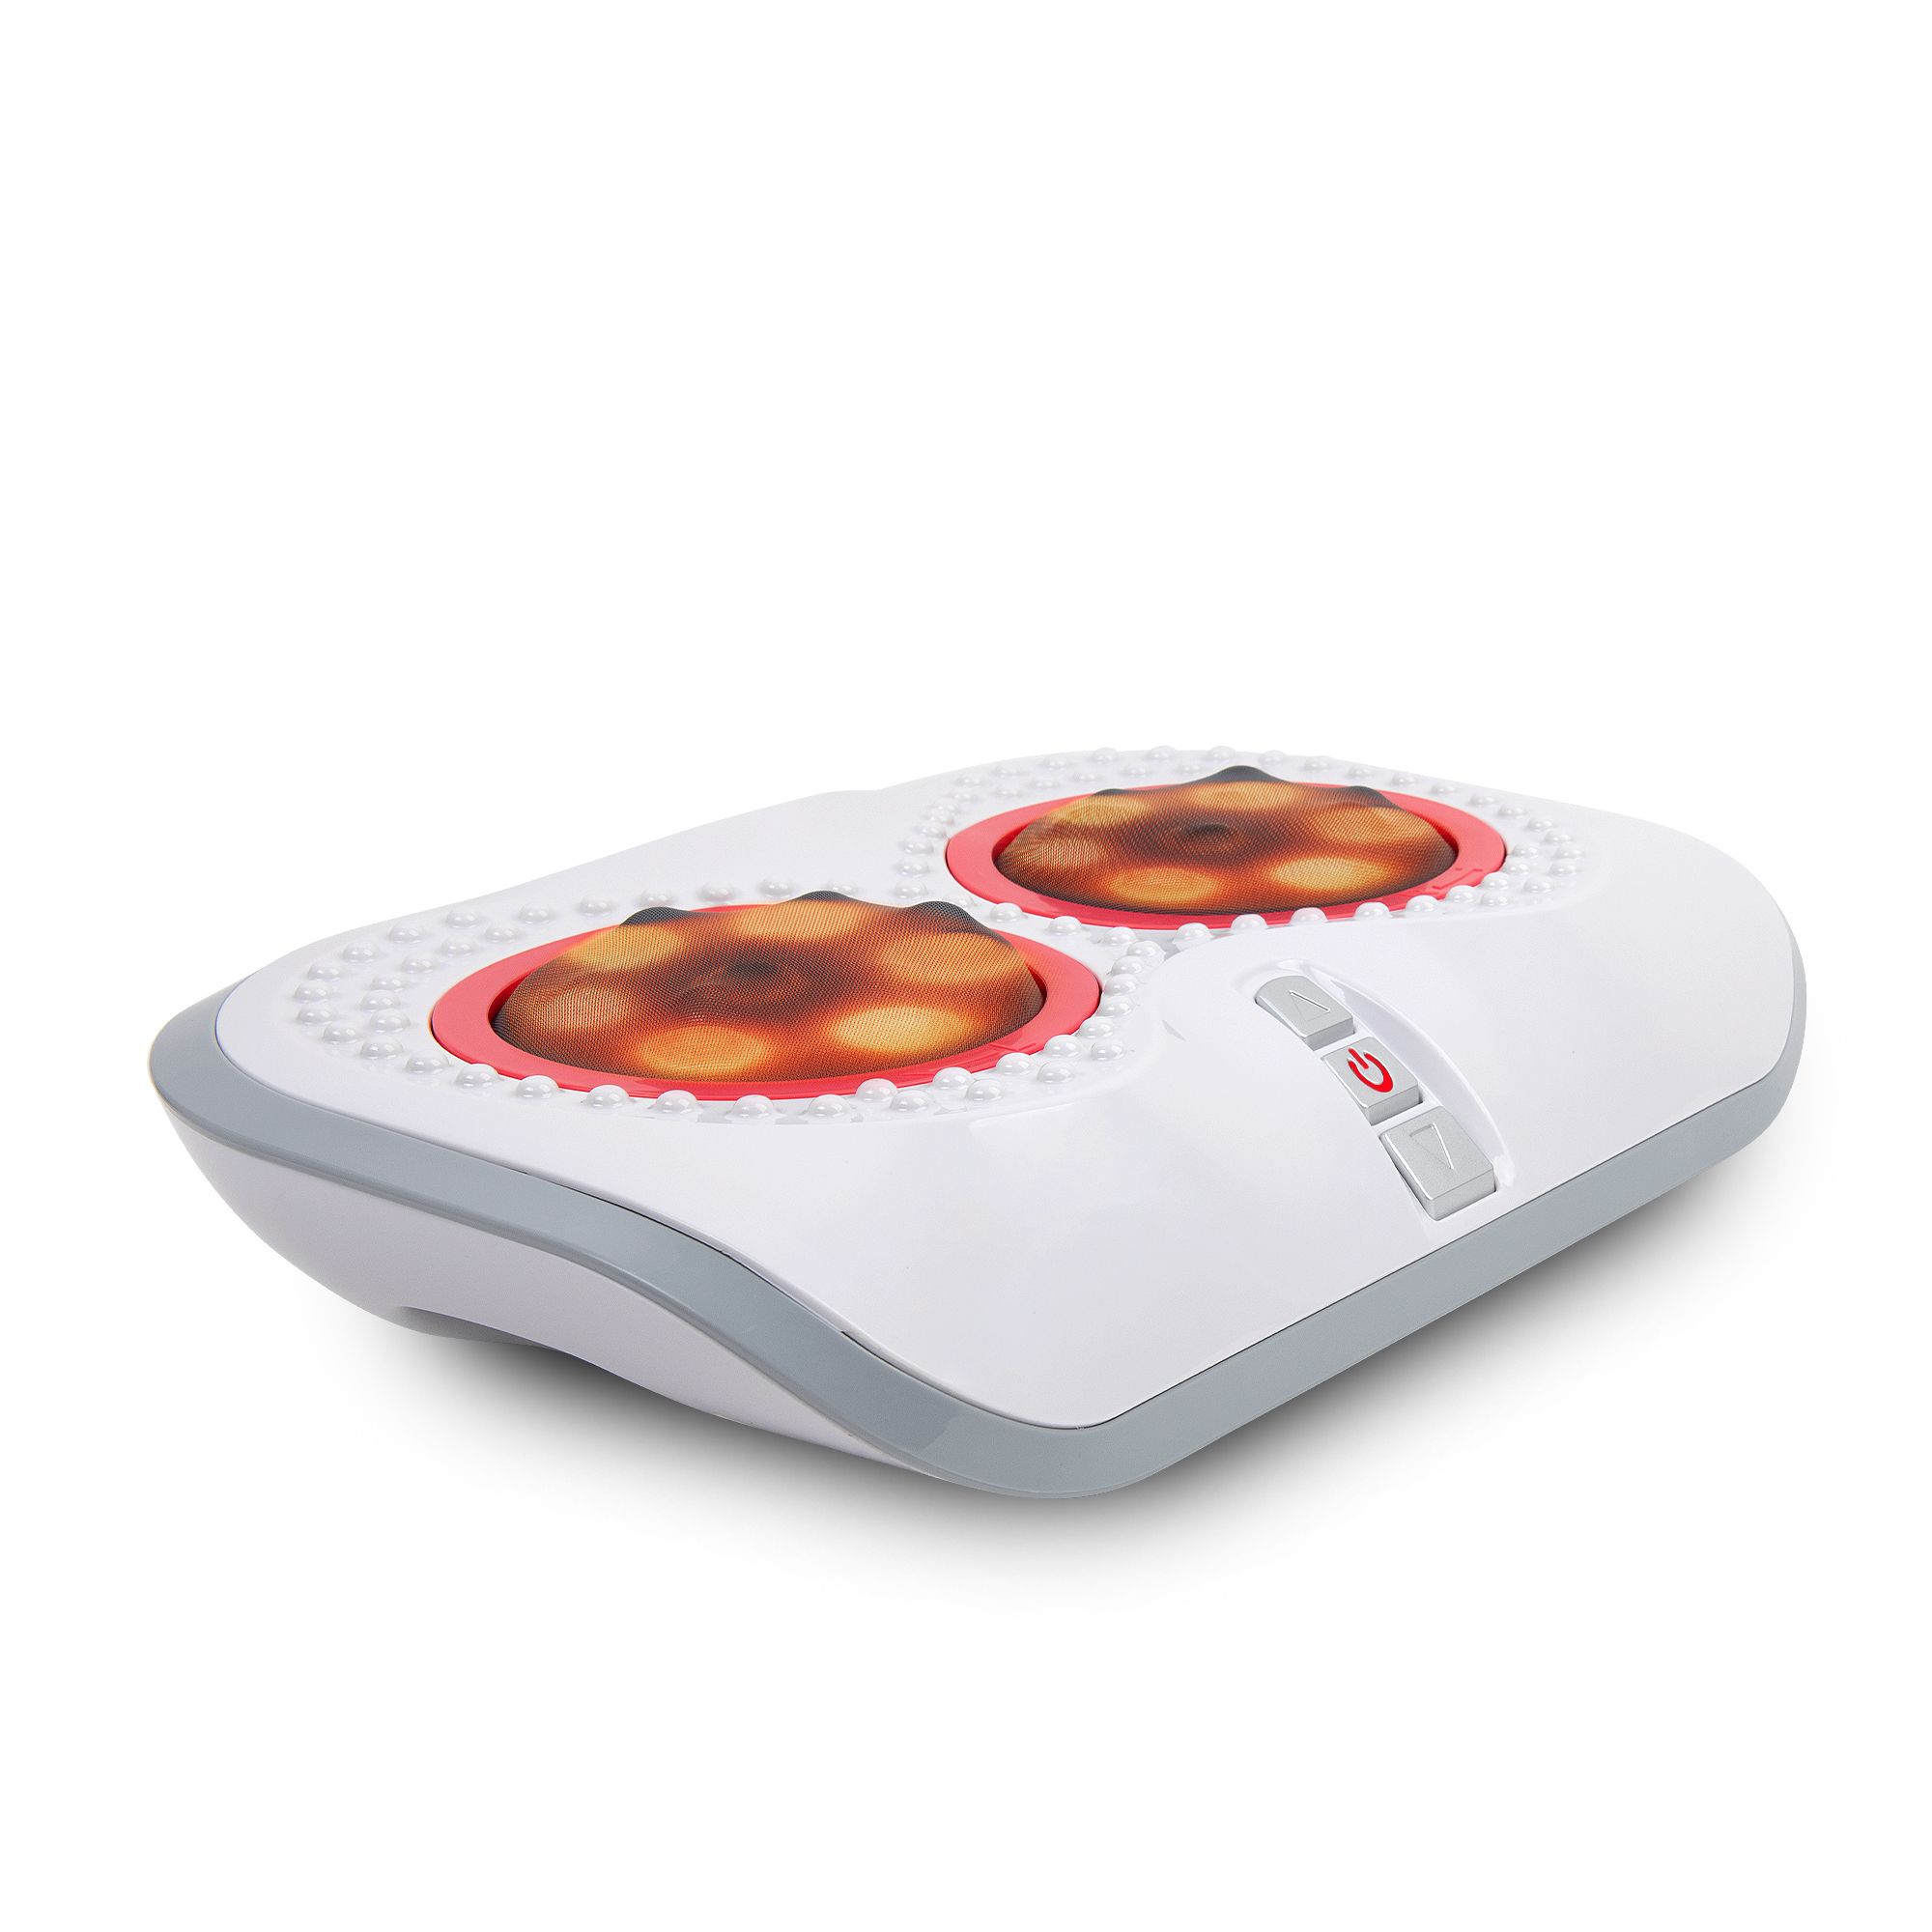 Picture of Carepeutic Turbo-Logy 3D Rolling Massager with Heated Therapy